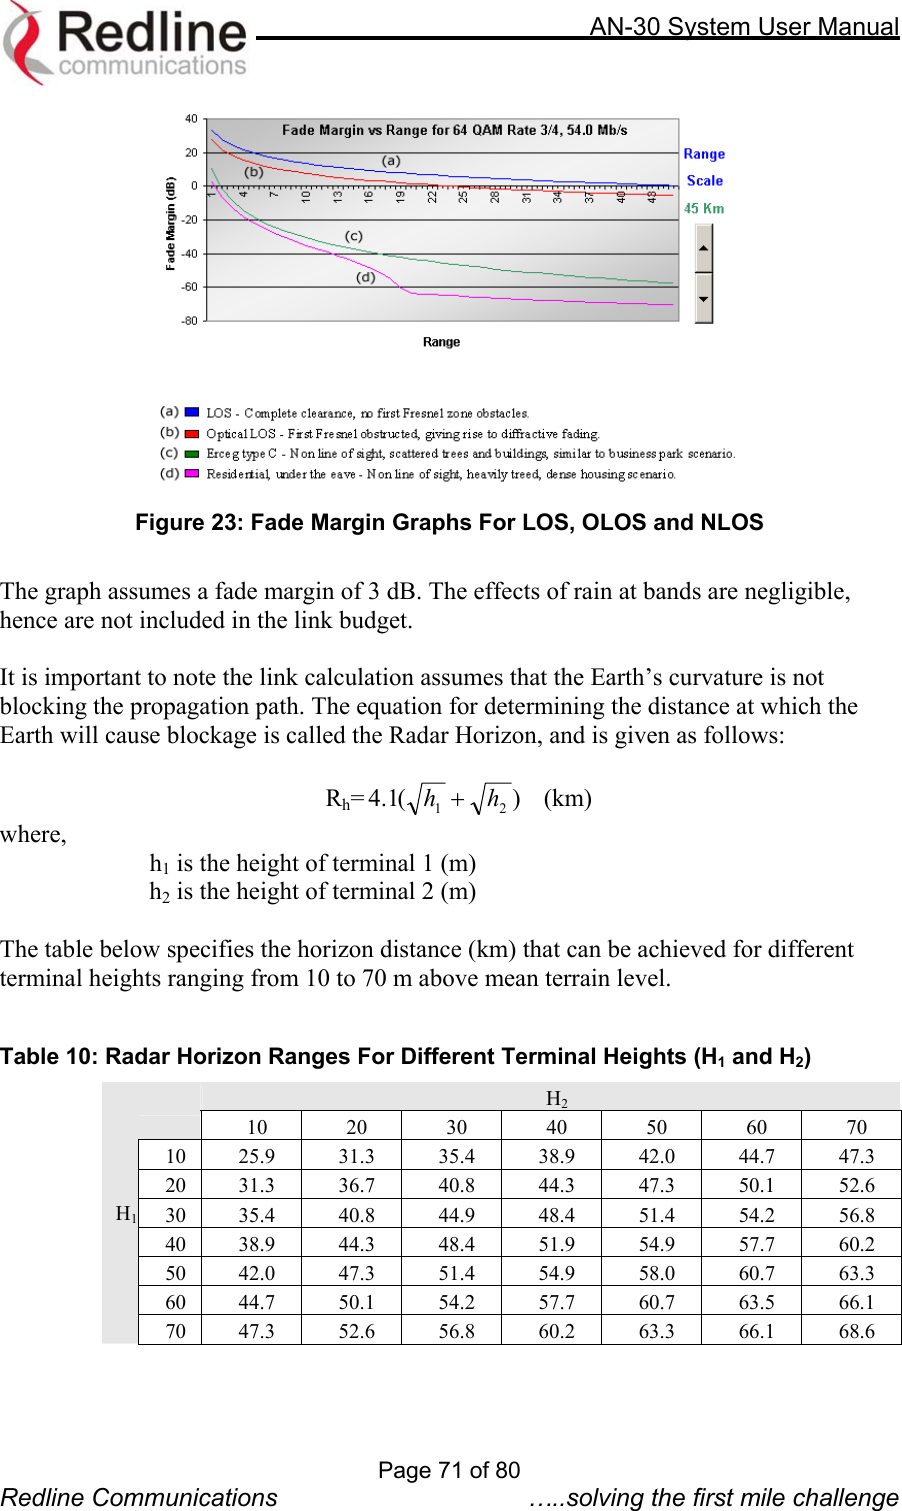     AN-30 System User Manual   Figure 23: Fade Margin Graphs For LOS, OLOS and NLOS  The graph assumes a fade margin of 3 dB. The effects of rain at bands are negligible, hence are not included in the link budget.     It is important to note the link calculation assumes that the Earth’s curvature is not blocking the propagation path. The equation for determining the distance at which the Earth will cause blockage is called the Radar Horizon, and is given as follows:  Rh=)(1.4 21 hh +   (km) where, h1 is the height of terminal 1 (m) h2 is the height of terminal 2 (m)  The table below specifies the horizon distance (km) that can be achieved for different terminal heights ranging from 10 to 70 m above mean terrain level.  Table 10: Radar Horizon Ranges For Different Terminal Heights (H1 and H2)   H2  10 20 30 40 50 60 70 10 25.9 31.3 35.4 38.9 42.0 44.7 47.3 20 31.3 36.7 40.8 44.3 47.3 50.1 52.6 30 35.4 40.8 44.9 48.4 51.4 54.2 56.8 40 38.9 44.3 48.4 51.9 54.9 57.7 60.2 50 42.0 47.3 51.4 54.9 58.0 60.7 63.3 60 44.7 50.1 54.2 57.7 60.7 63.5 66.1 H1 70 47.3 52.6 56.8 60.2 63.3 66.1 68.6   Page 71 of 80 Redline Communications  …..solving the first mile challenge 